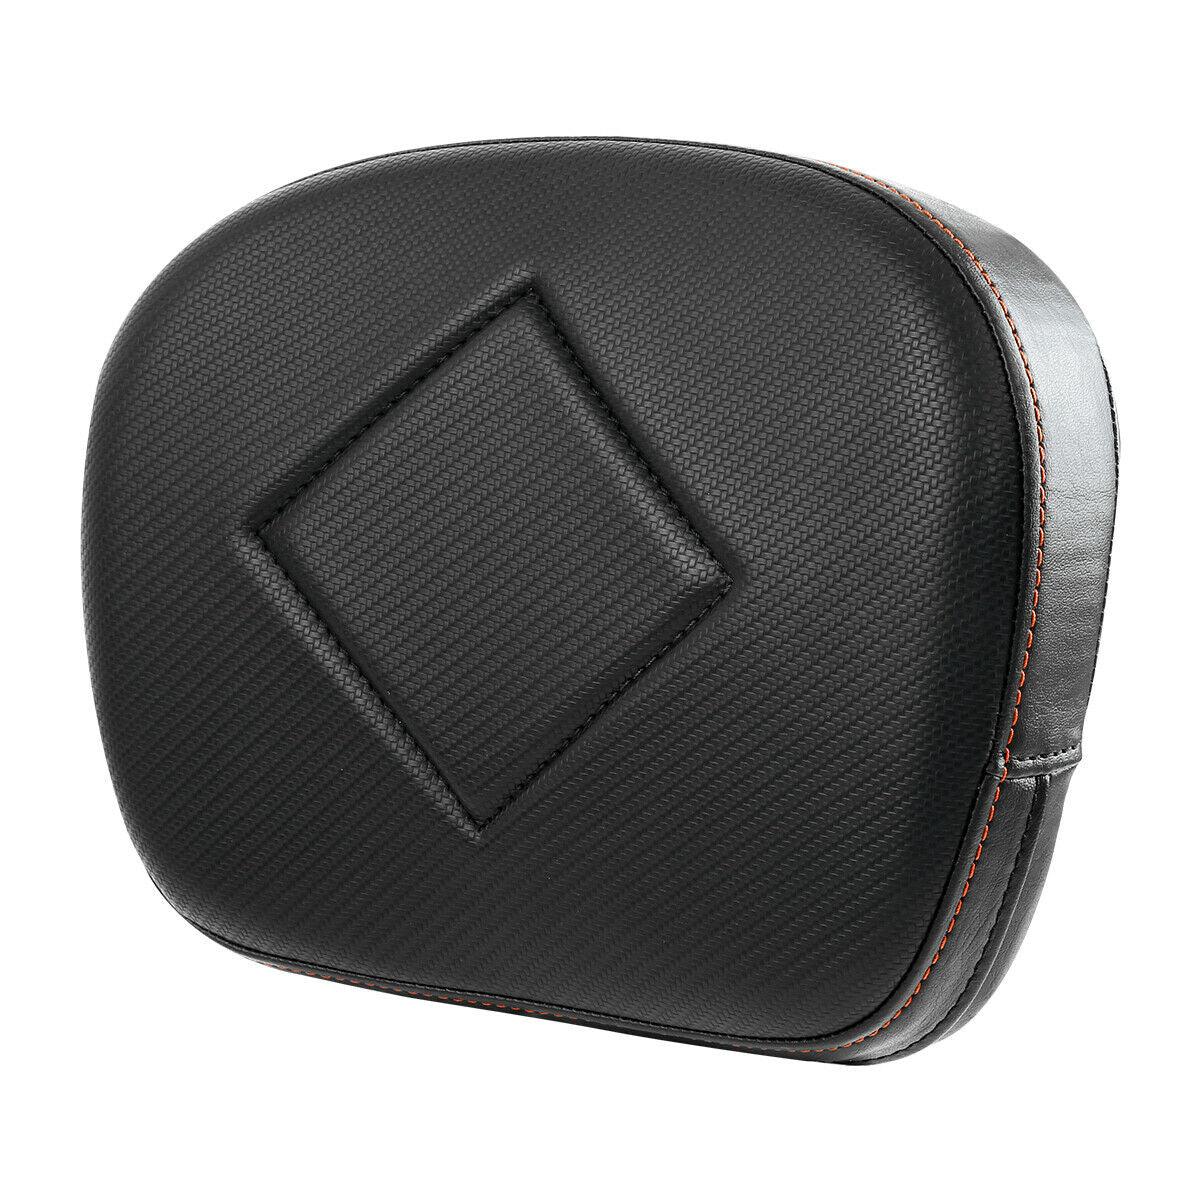 Passenger Sissy Bar Backrest Pad Fit For Harley Touring Electra Glide Softail - Moto Life Products